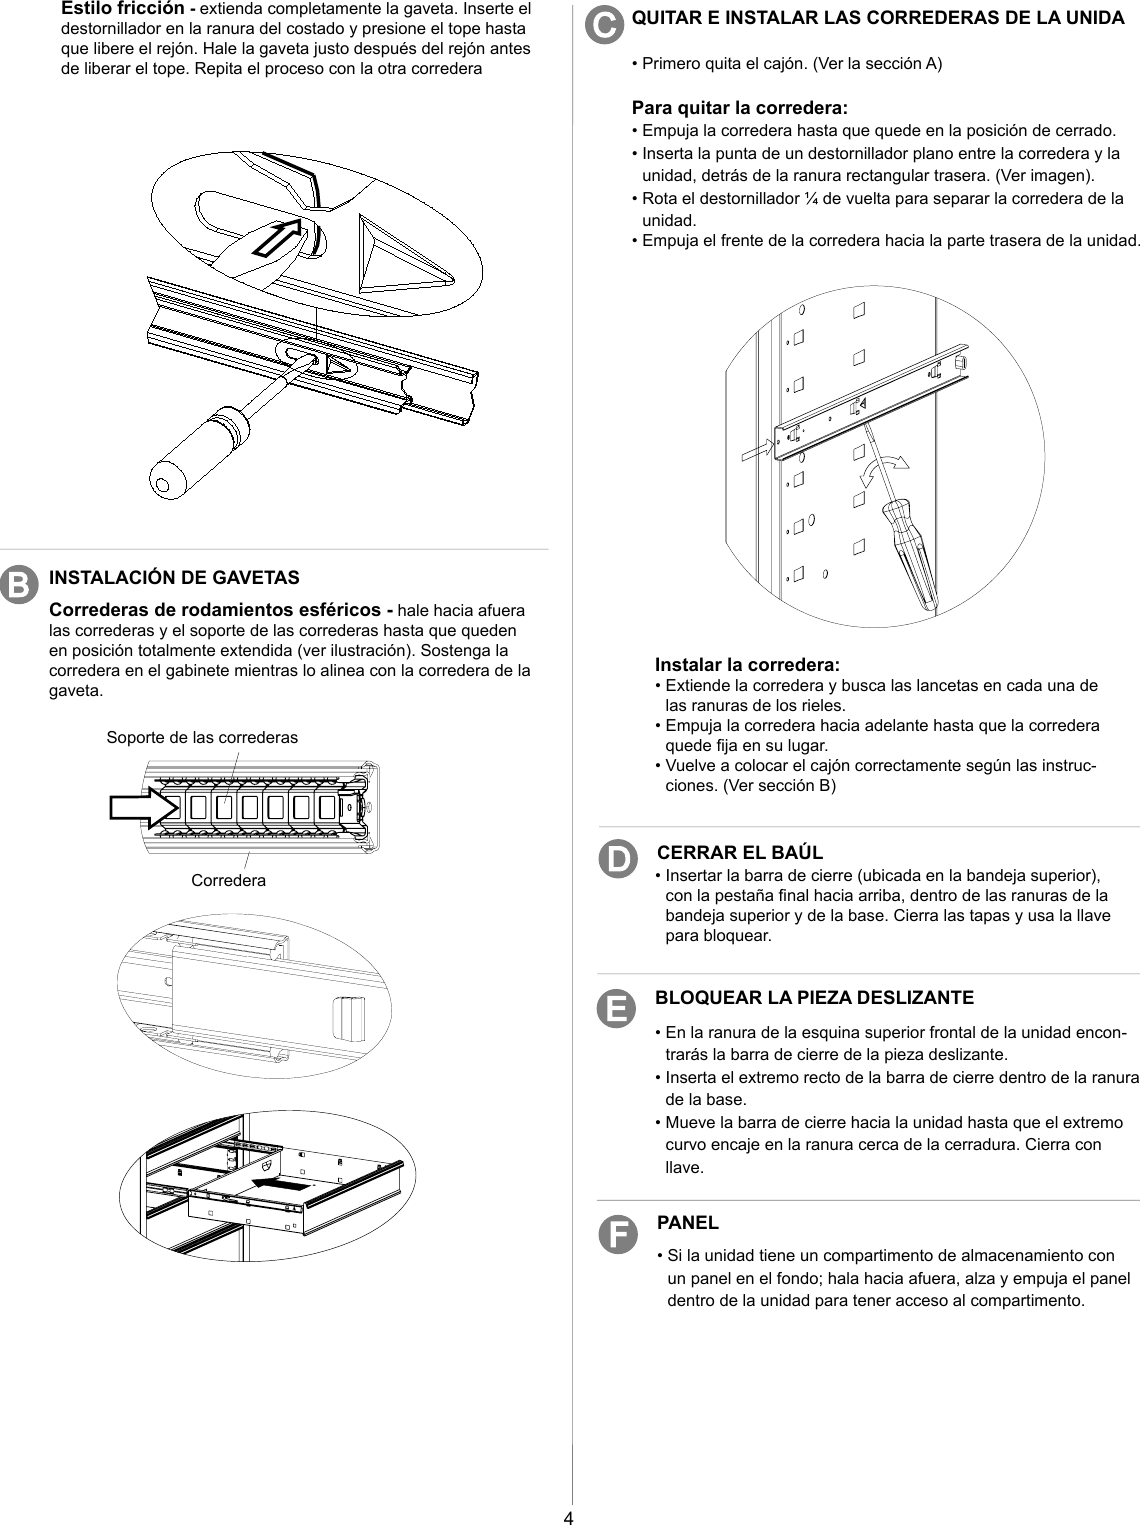 Page 8 of 8 - Craftsman Craftsman-5-Drawer-Standard-Duty-Ball-Bearing-Tool-Center-Black-Use-And-Care-Manual-  Craftsman-5-drawer-standard-duty-ball-bearing-tool-center-black-use-and-care-manual